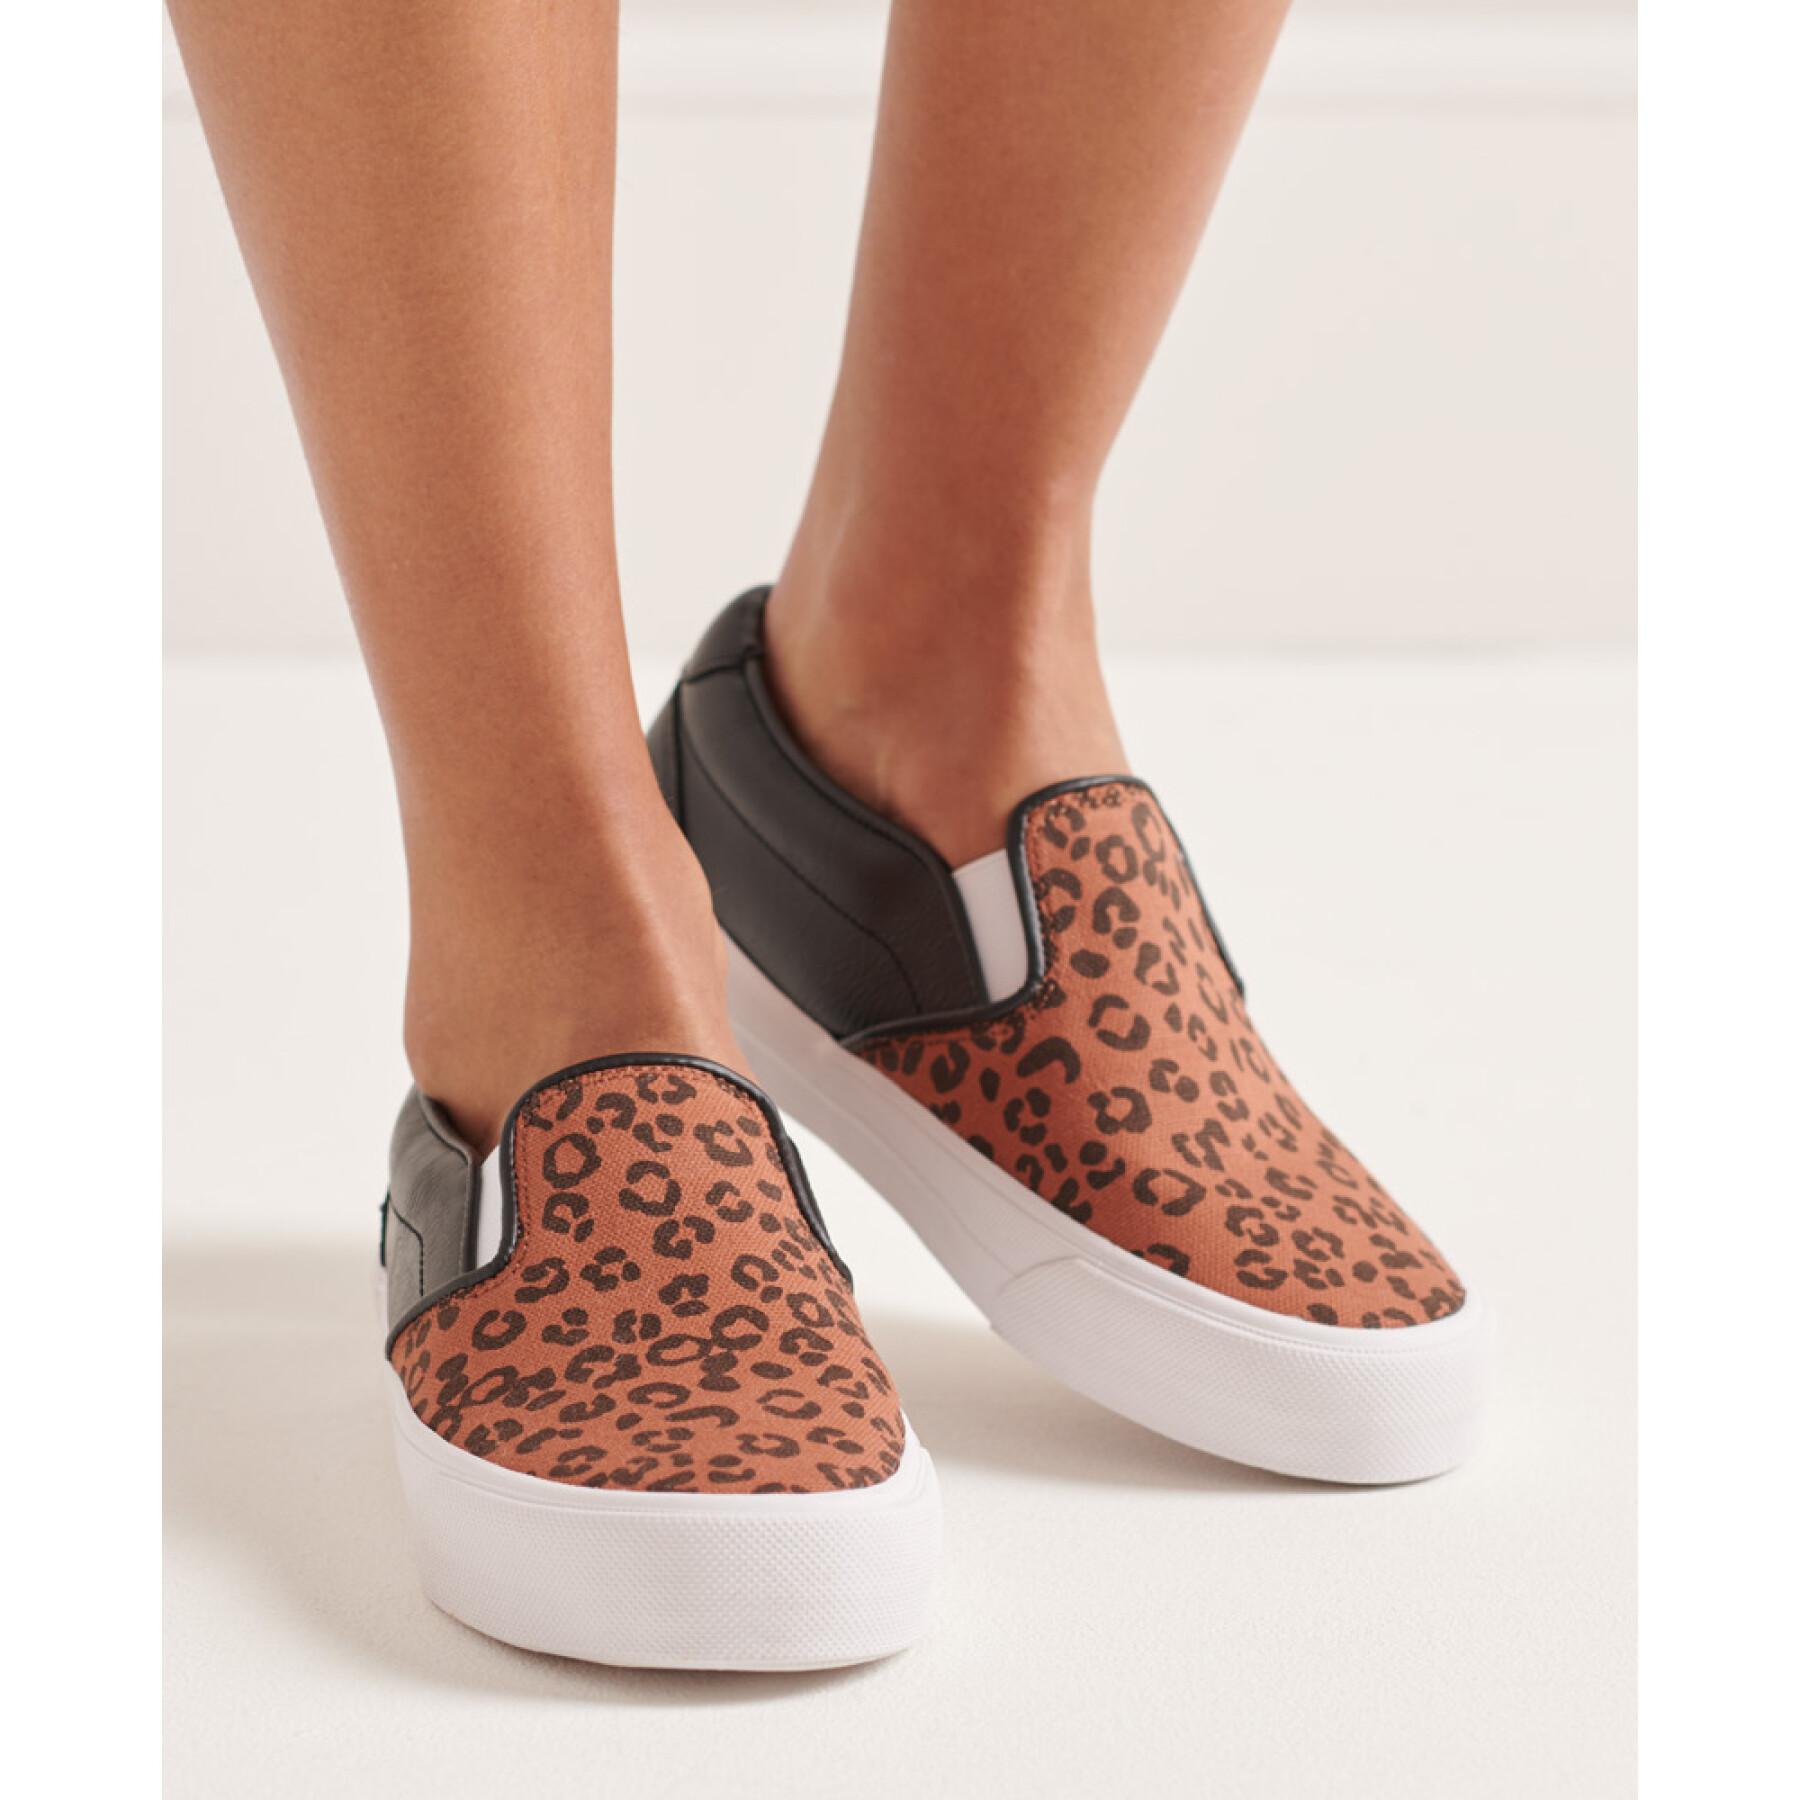 Women's slip-on sneakers Superdry Classic